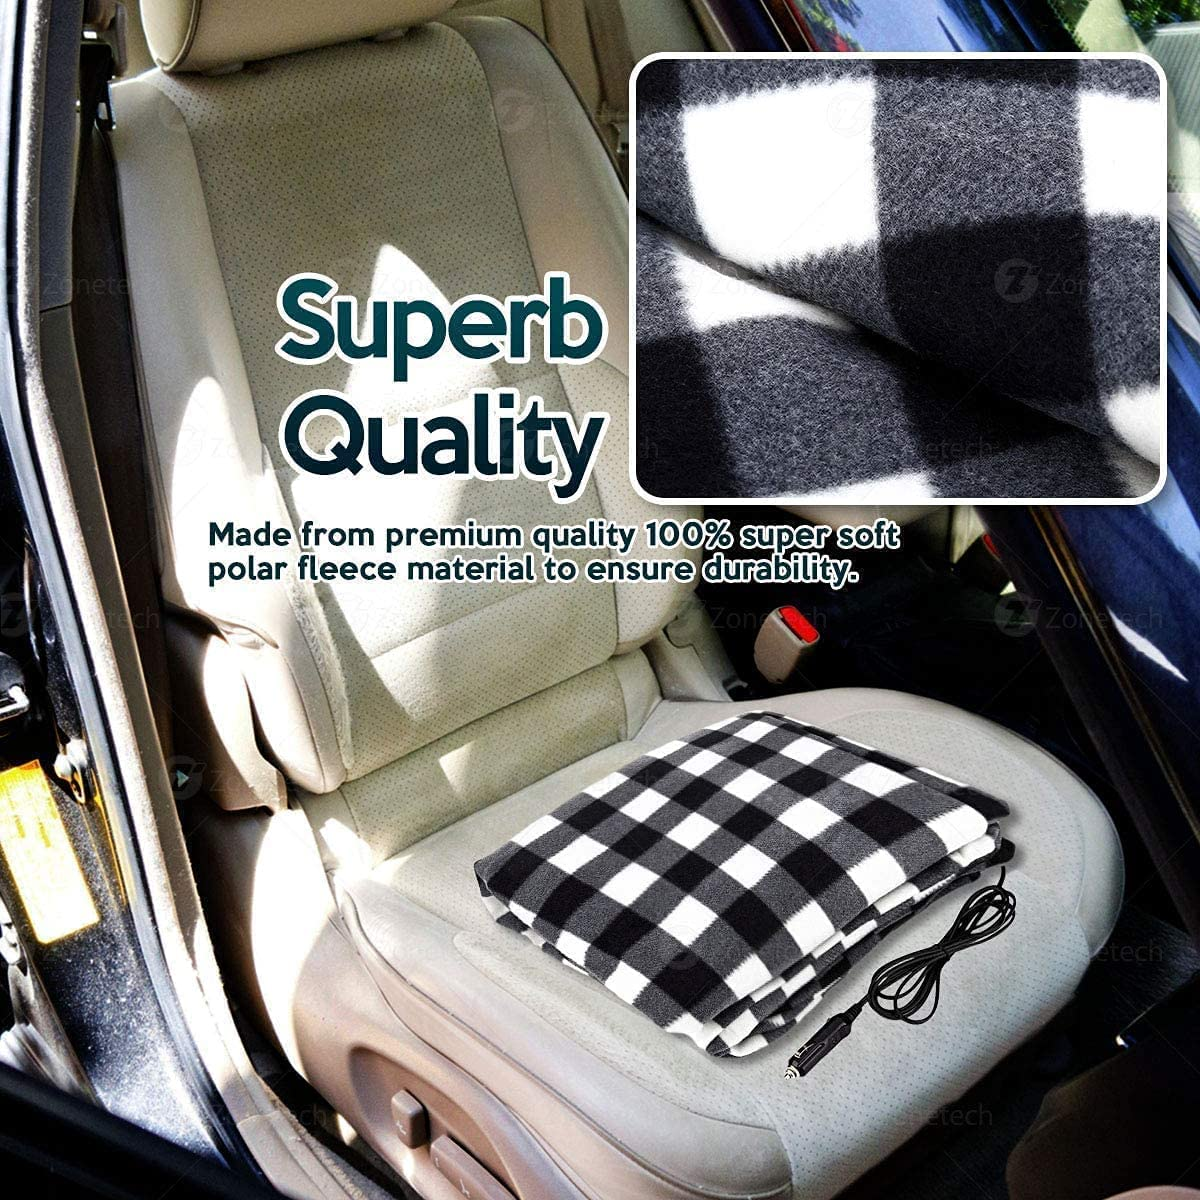 Car Heated Blanket, 12V Heating Electric Blanket Throw 3 Heating Levels Fleece Heating Blanket for Travel Camping Picnic Heater (Black&White)